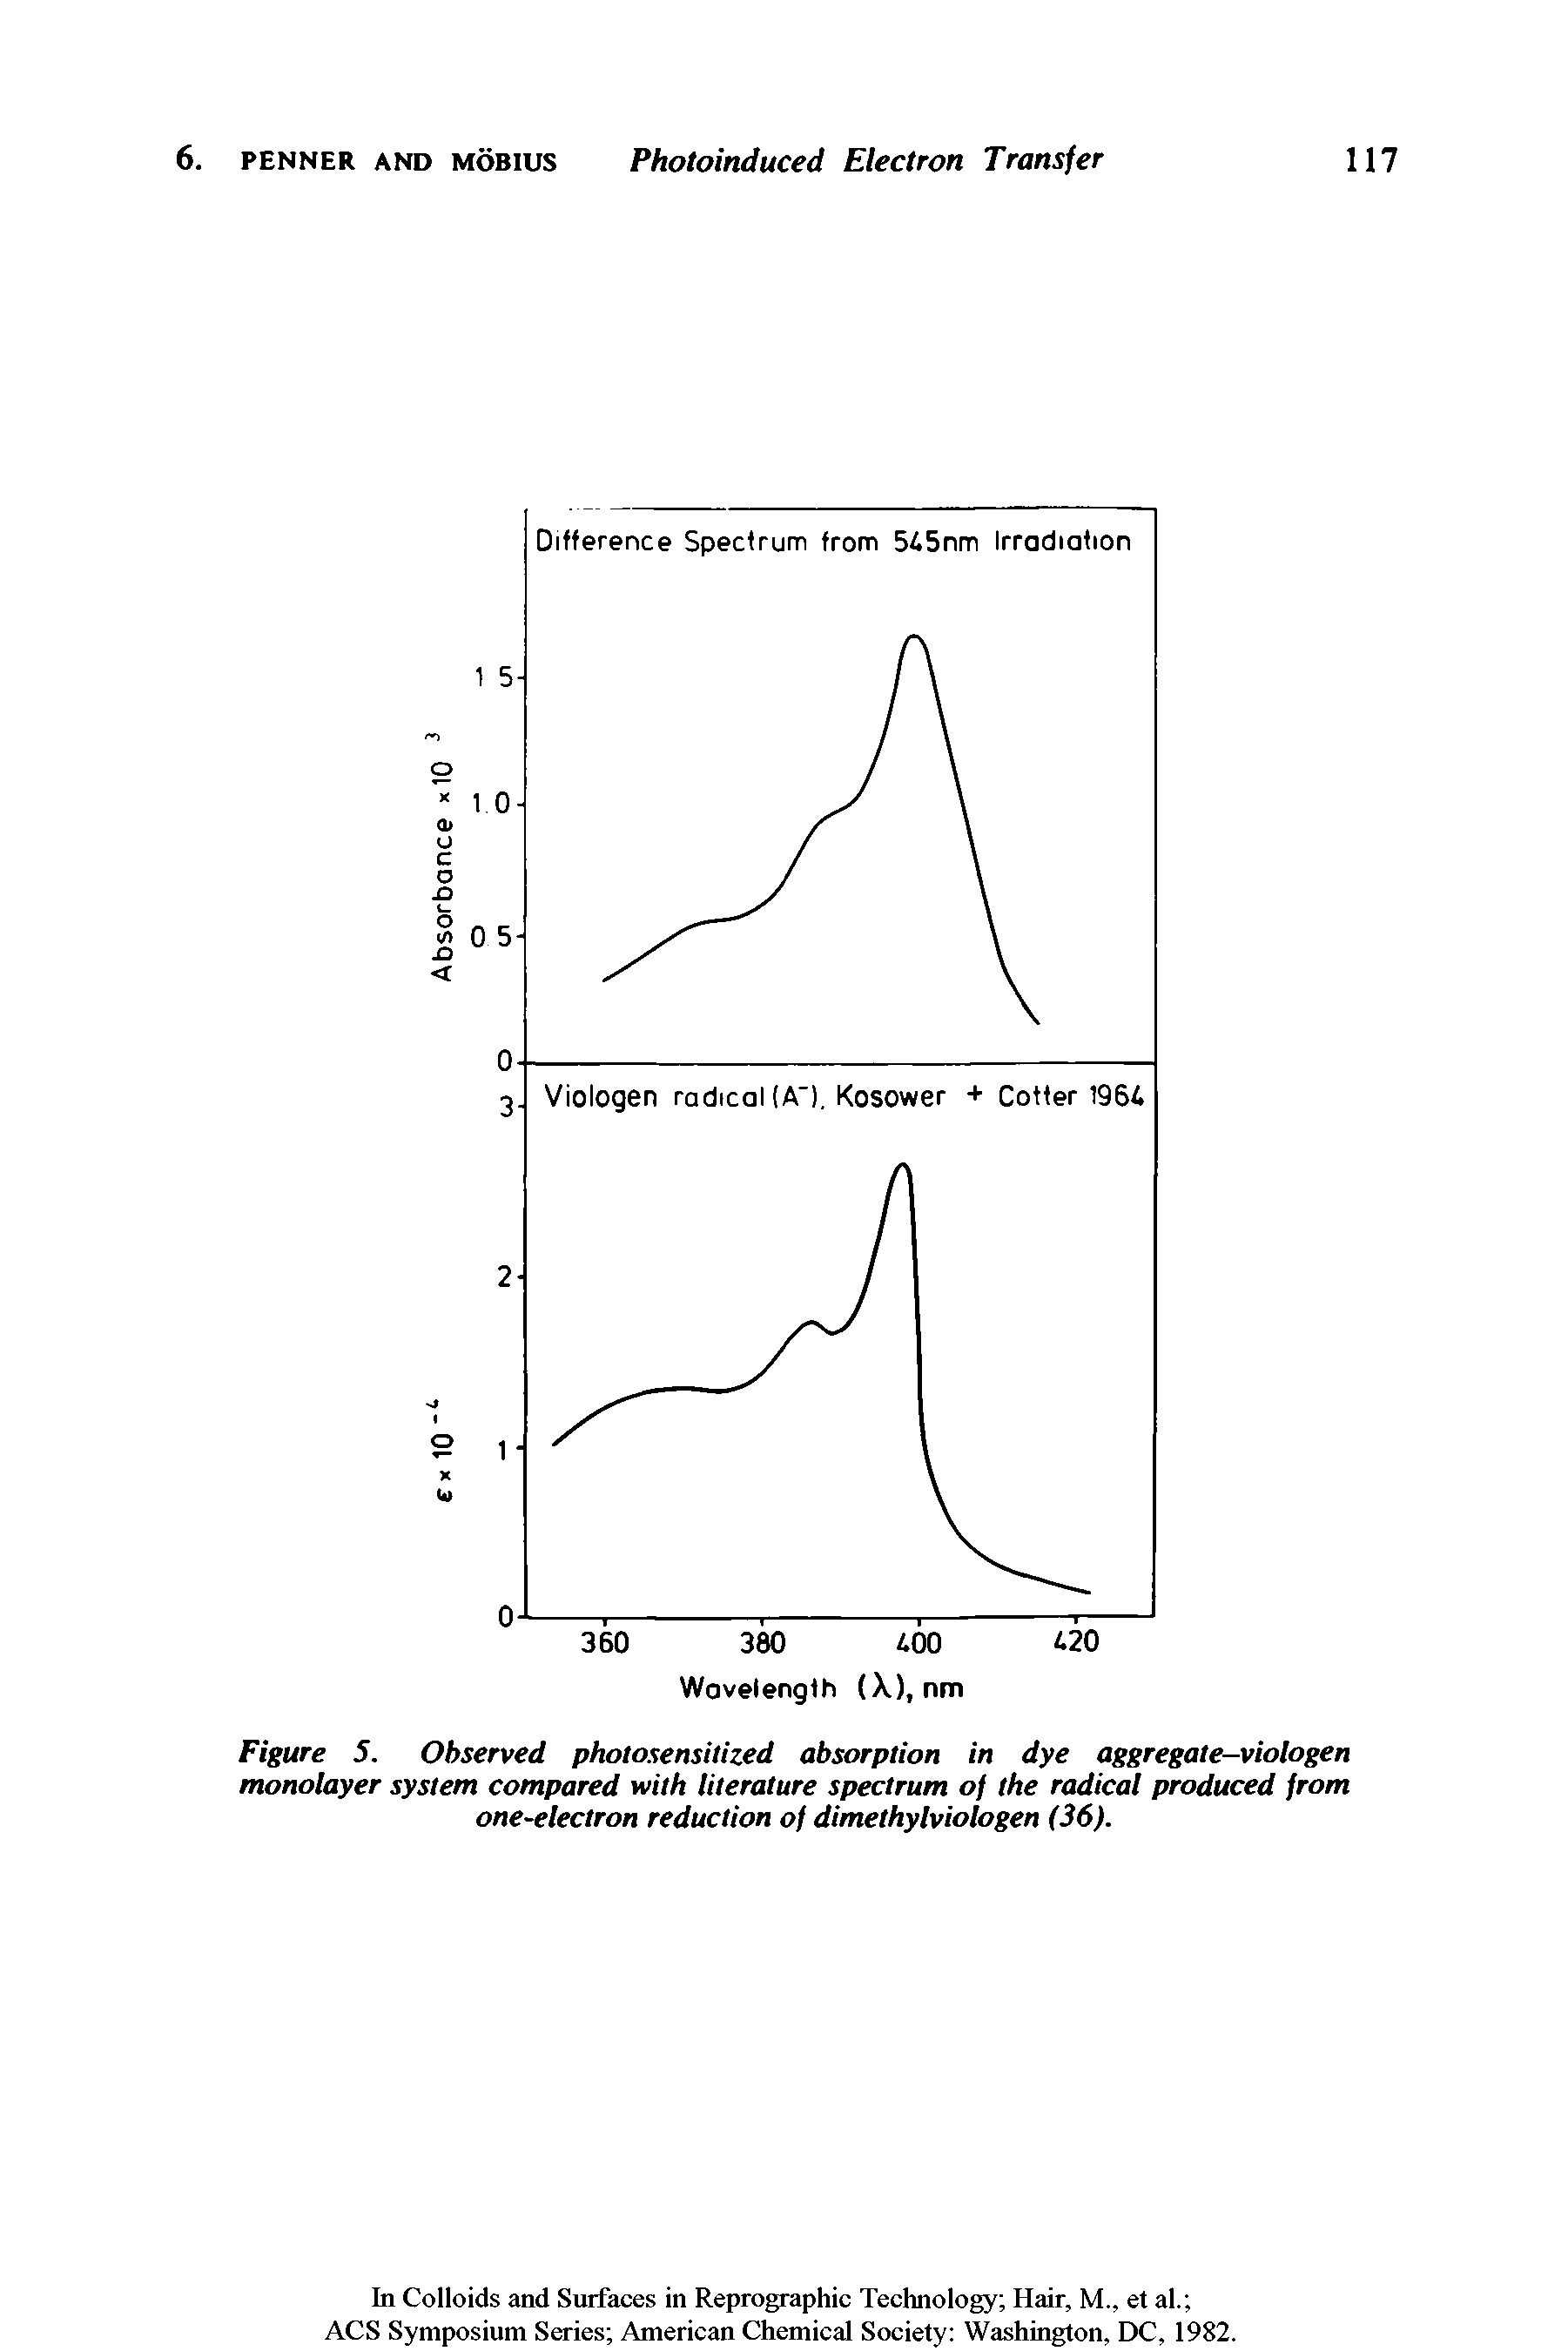 Figure 5. Observed photosensitized absorption in dye aggregate-viologen monolayer system compared with literature spectrum of the radical produced from one-electron reduction of dimethylviologen (36).